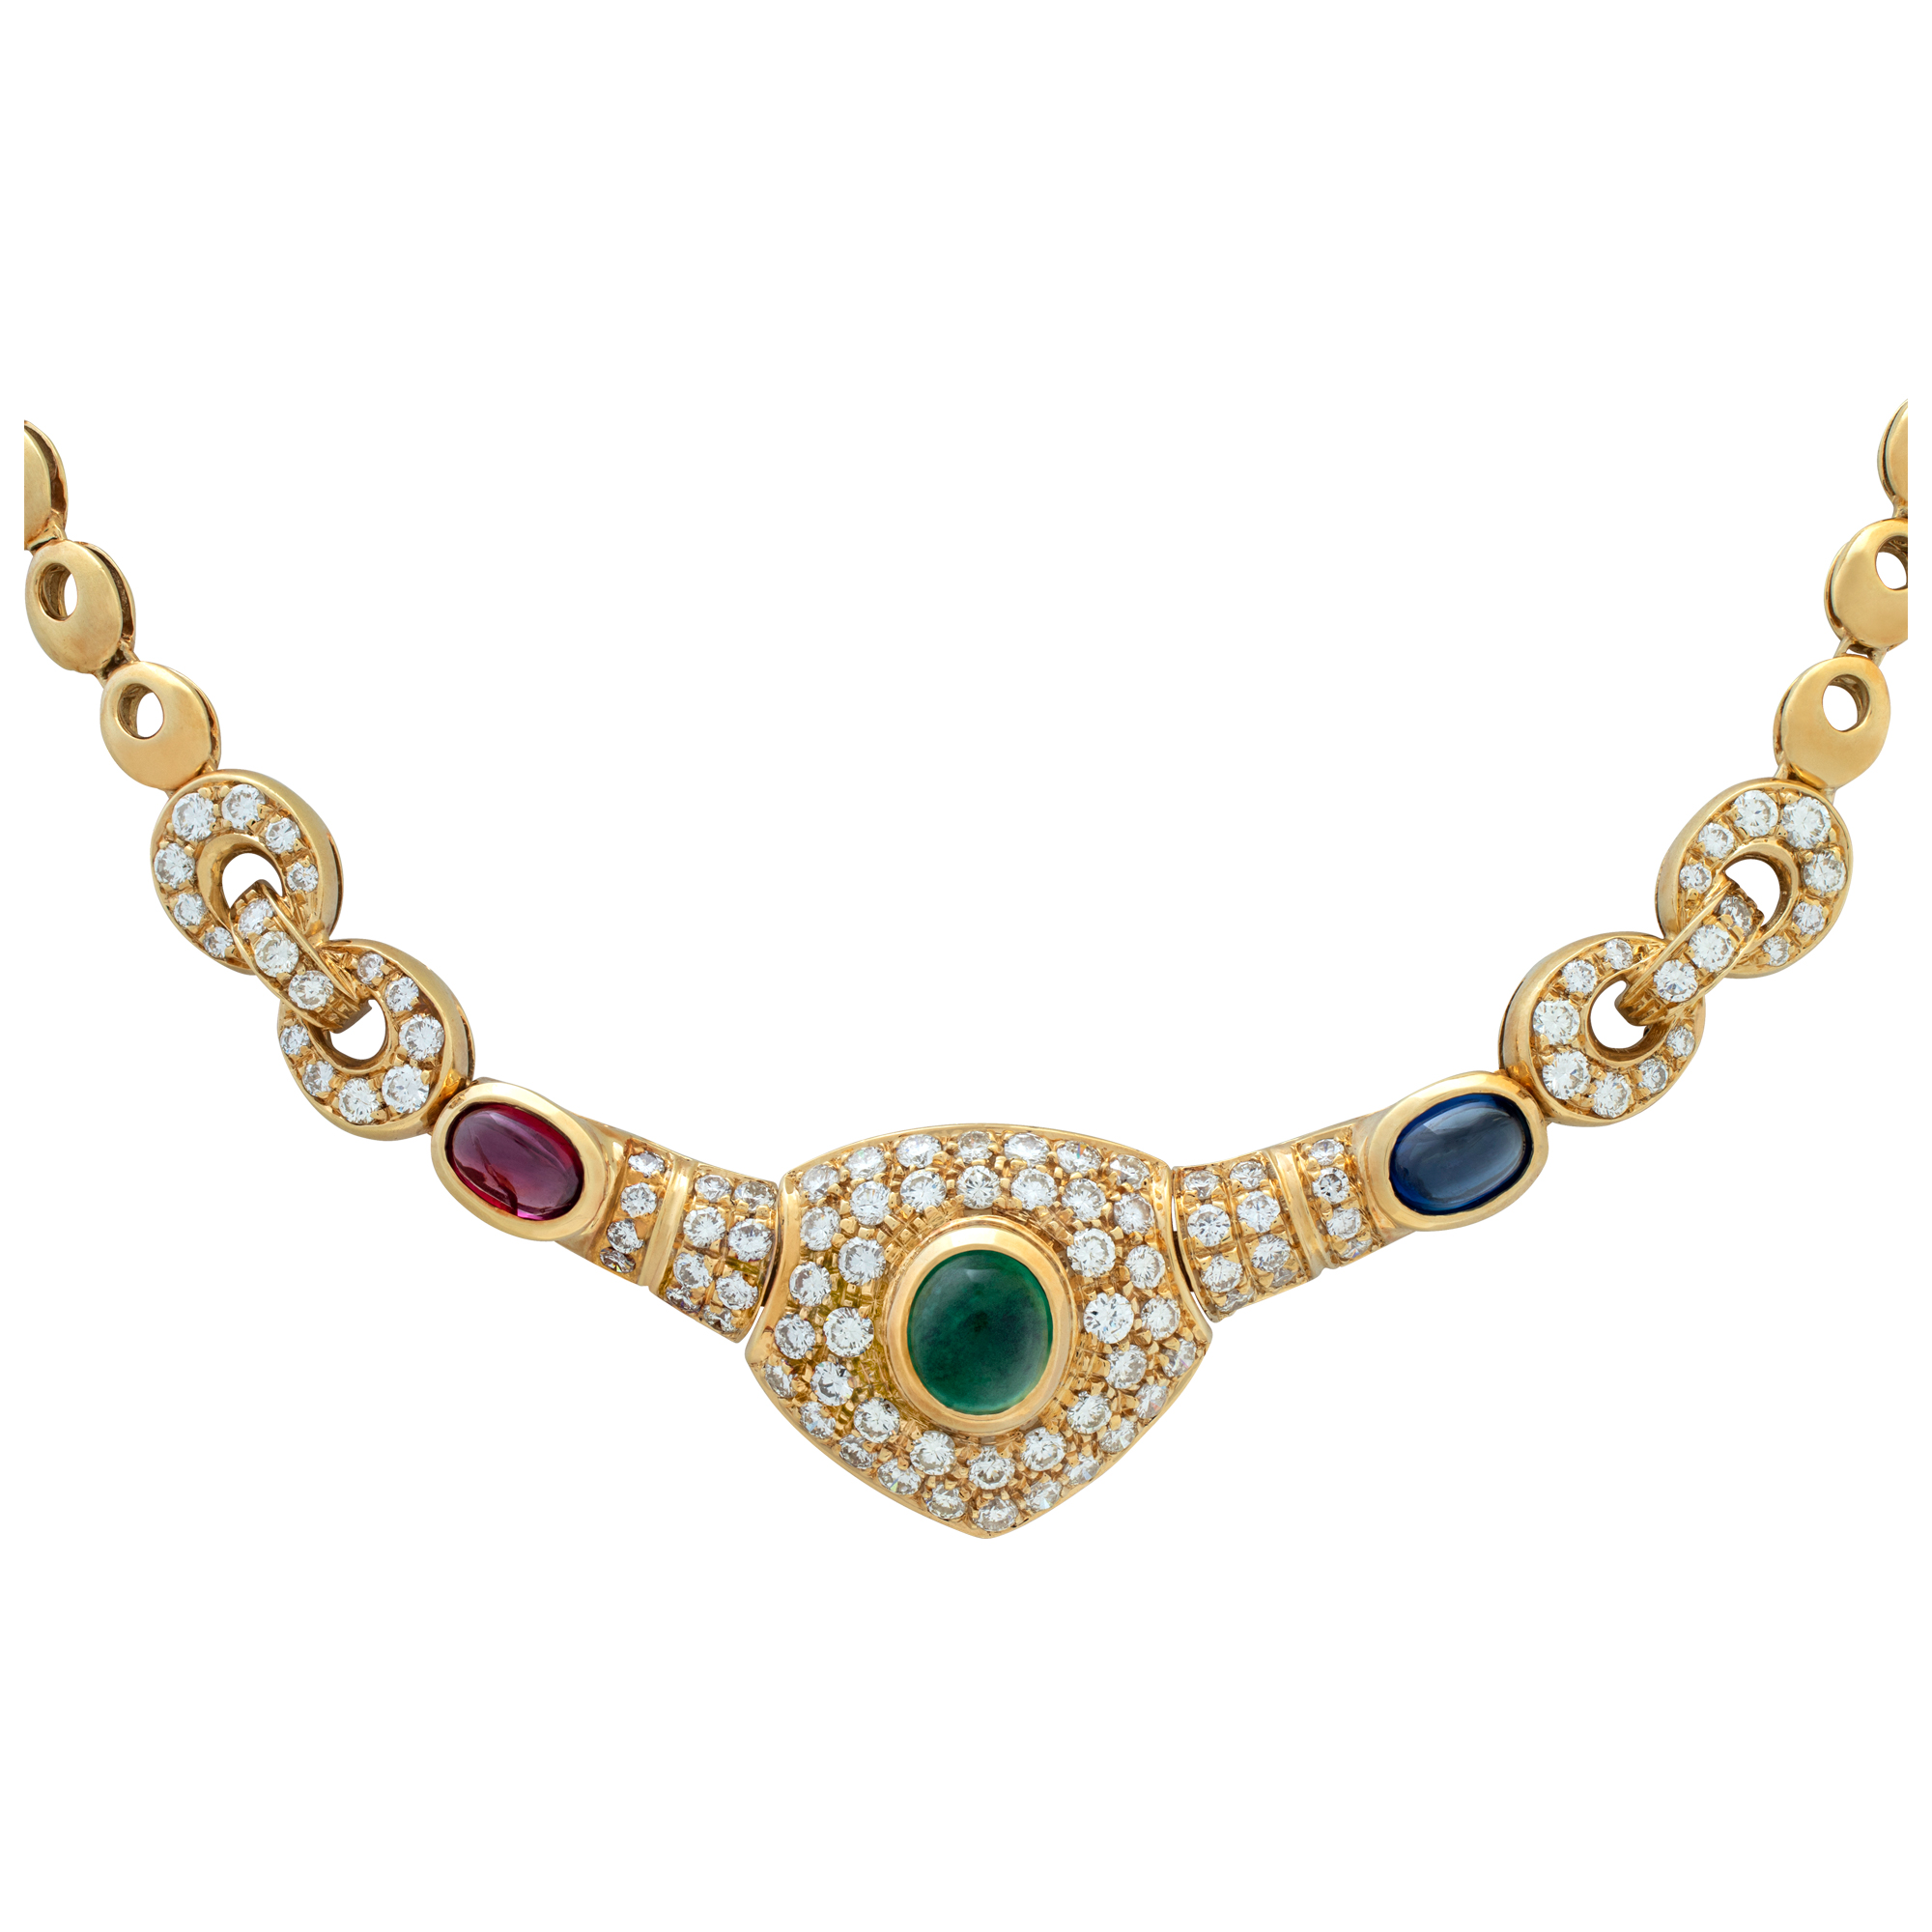 Cabochon emerald, sapphire and ruby necklace with over 3.00 carats round brilliant cut diamonds set in 18K yellow gold. Length: 16 inches. image 1